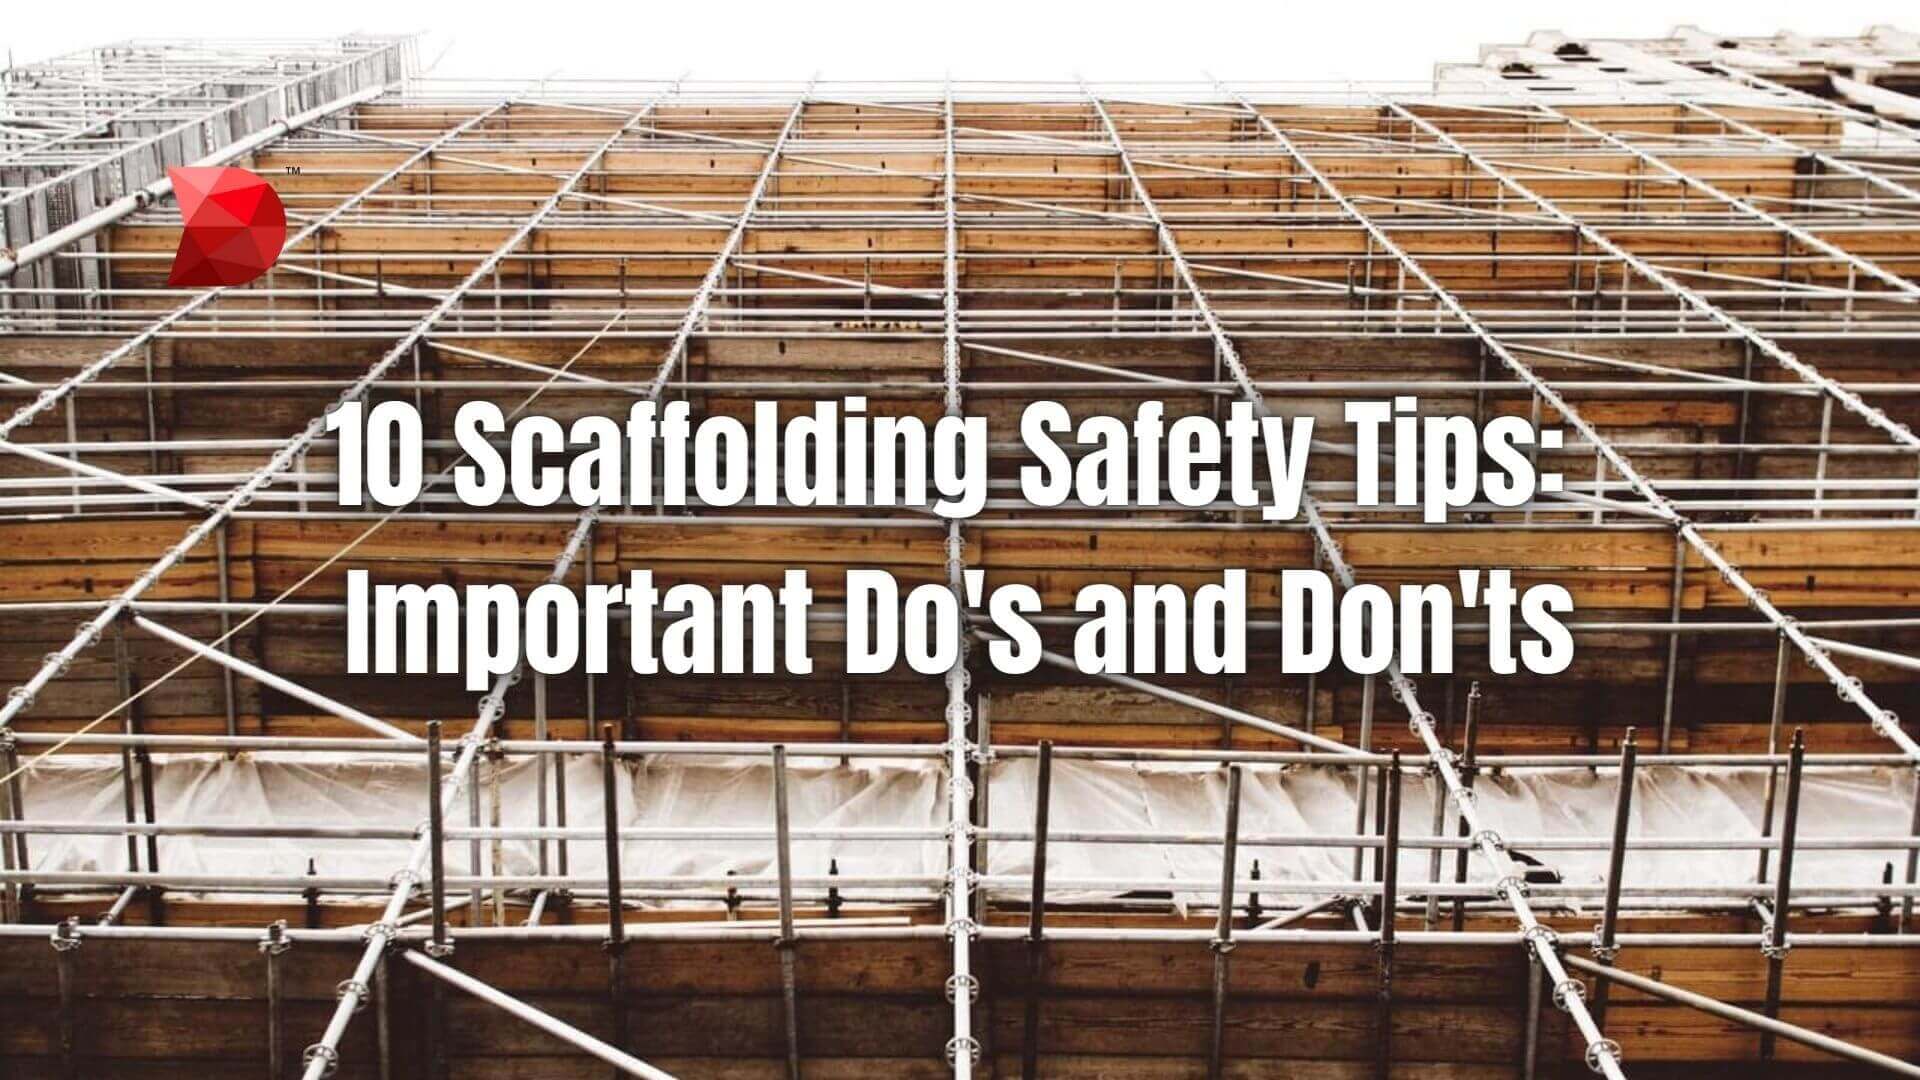 10 Scaffolding Safety Tips Important Do's and Don'ts